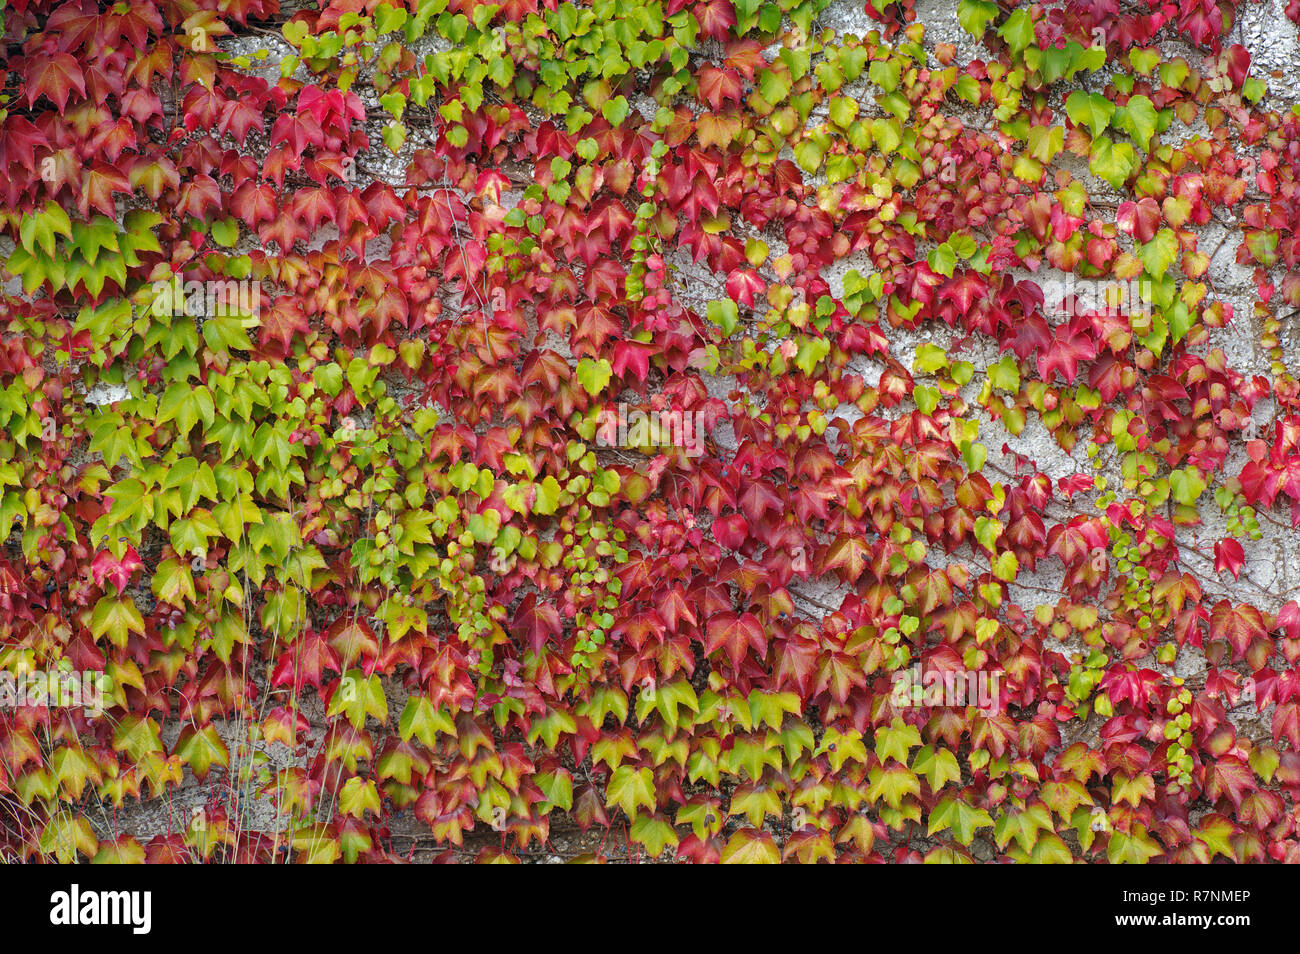 colors of the autumn: leaves of Parthenocissusn tricuspidata, the Boston ivy or Grape ivy, family Vitaceae Stock Photo